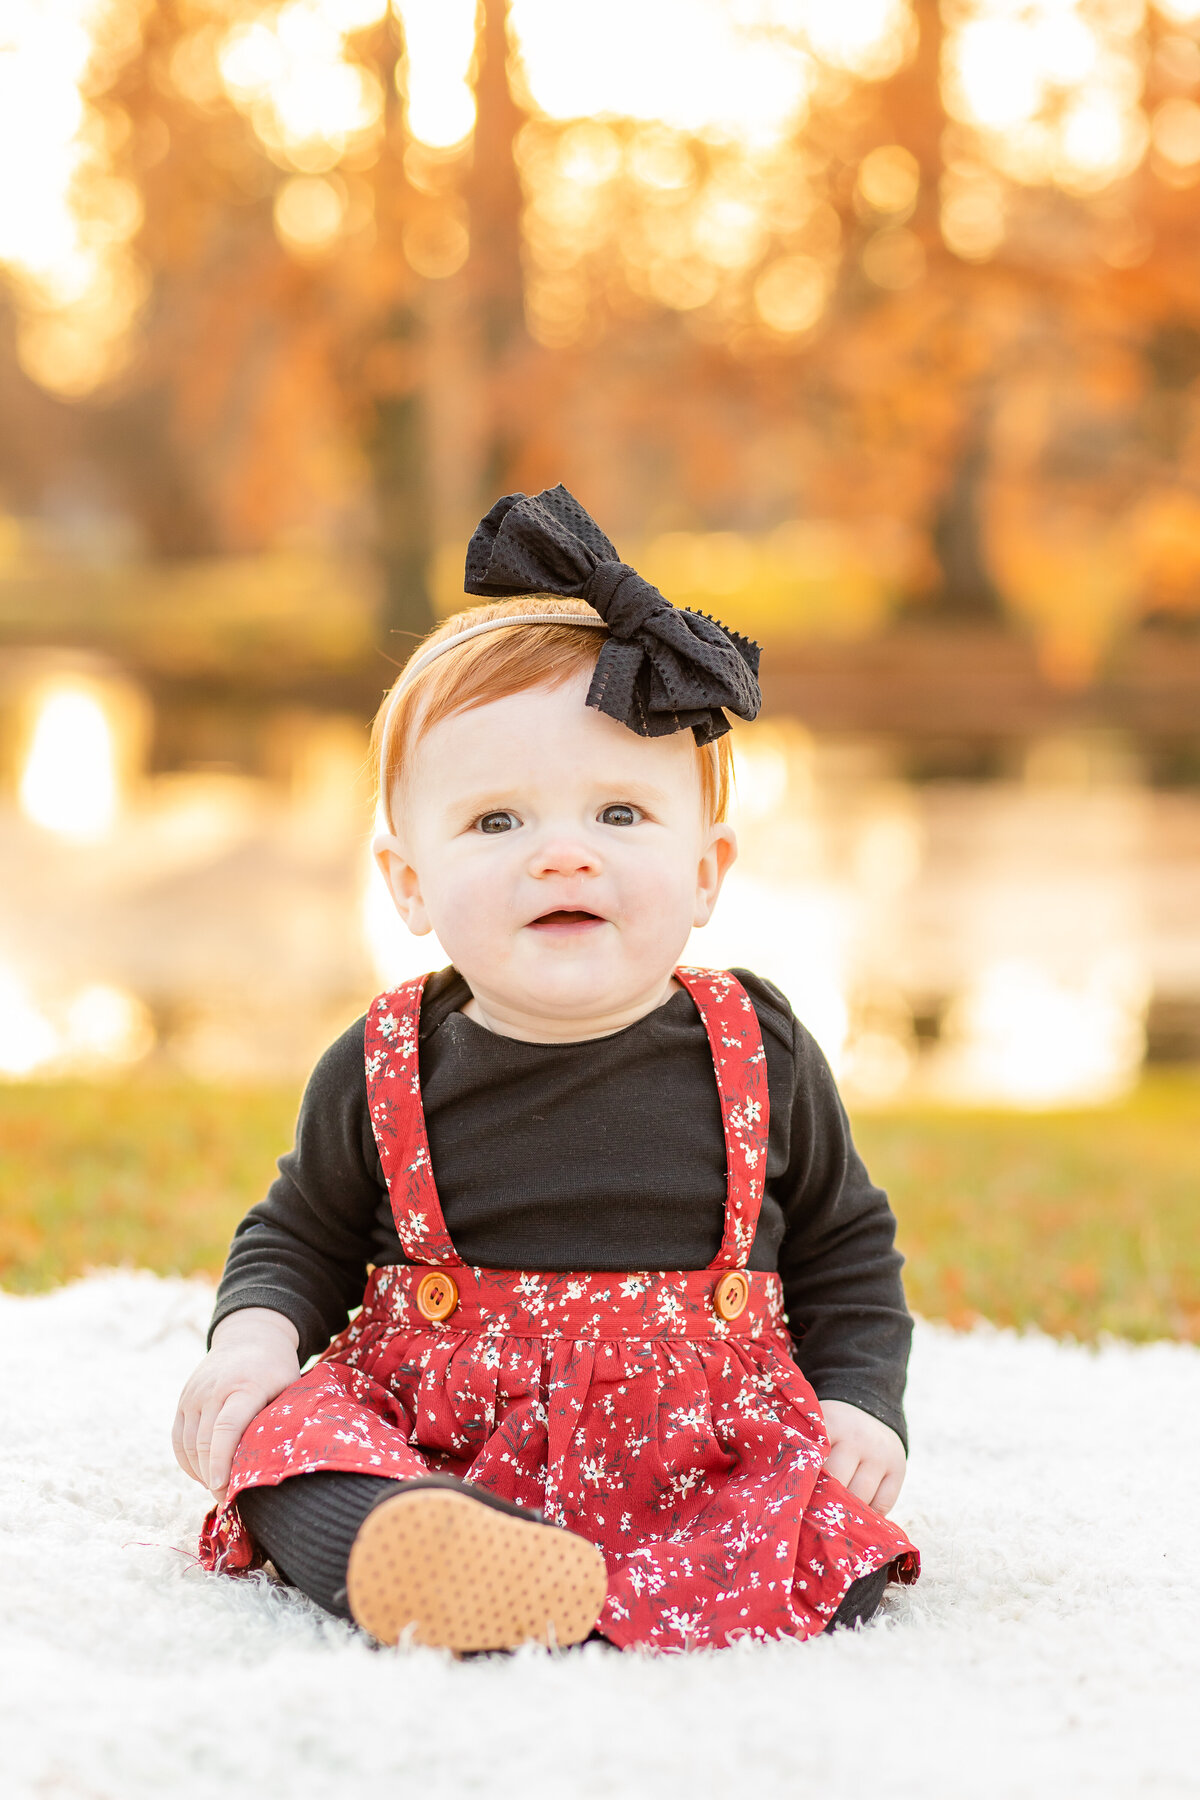 Baby girl sitting on blanket with golden Fall leaves and pond backdrop